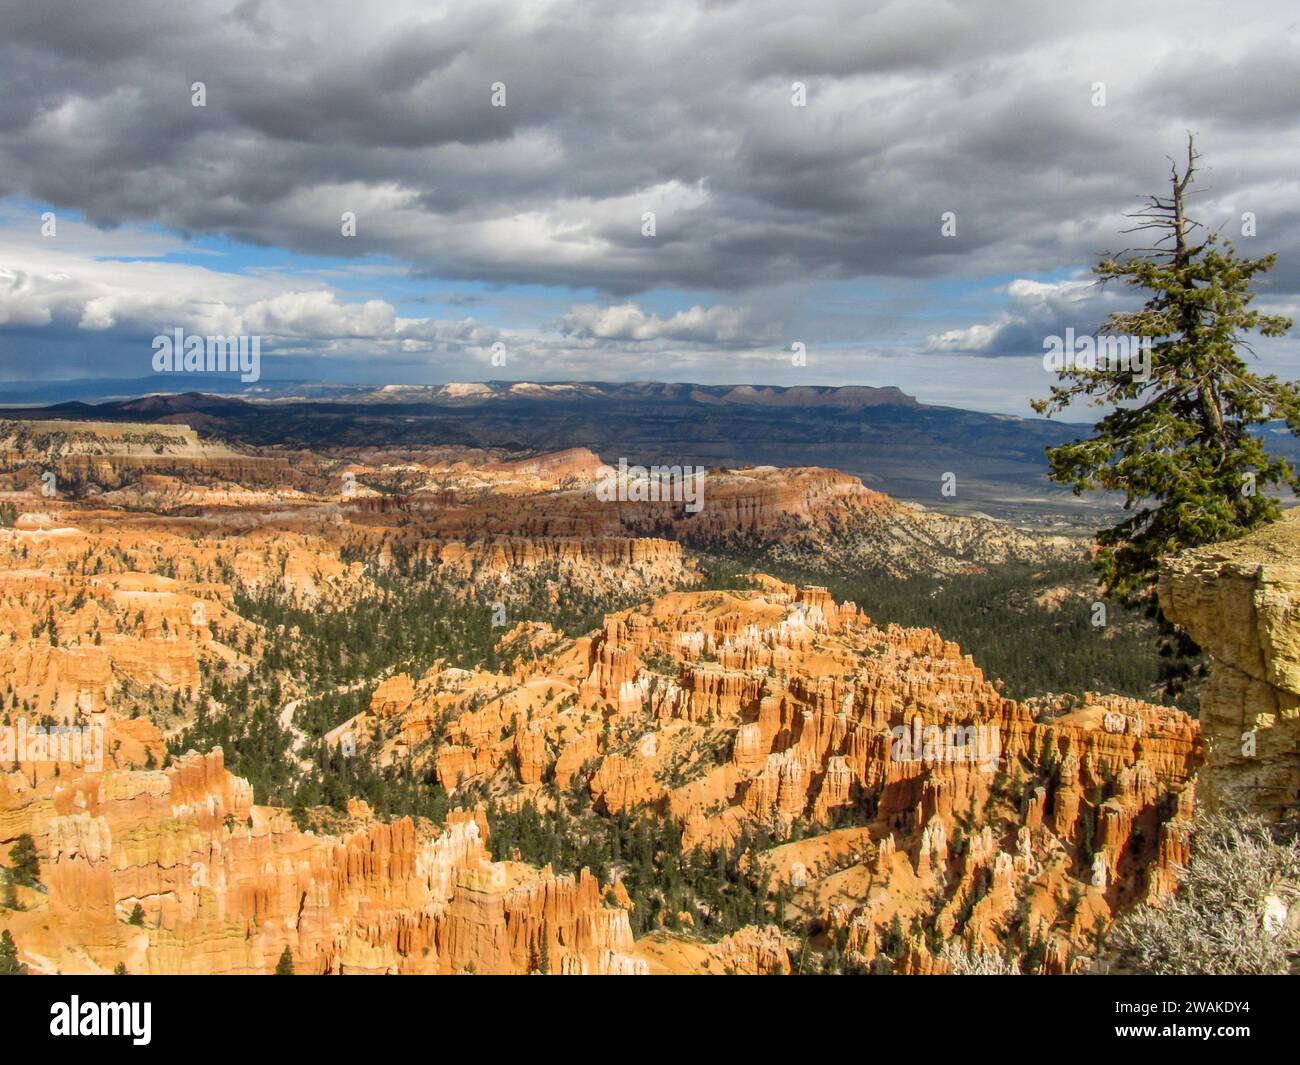 Hoodoos of Bryce canyon stretching into the distance, with a Bristlecone pine growing on the cliffs edge in the foreground. Stock Photo